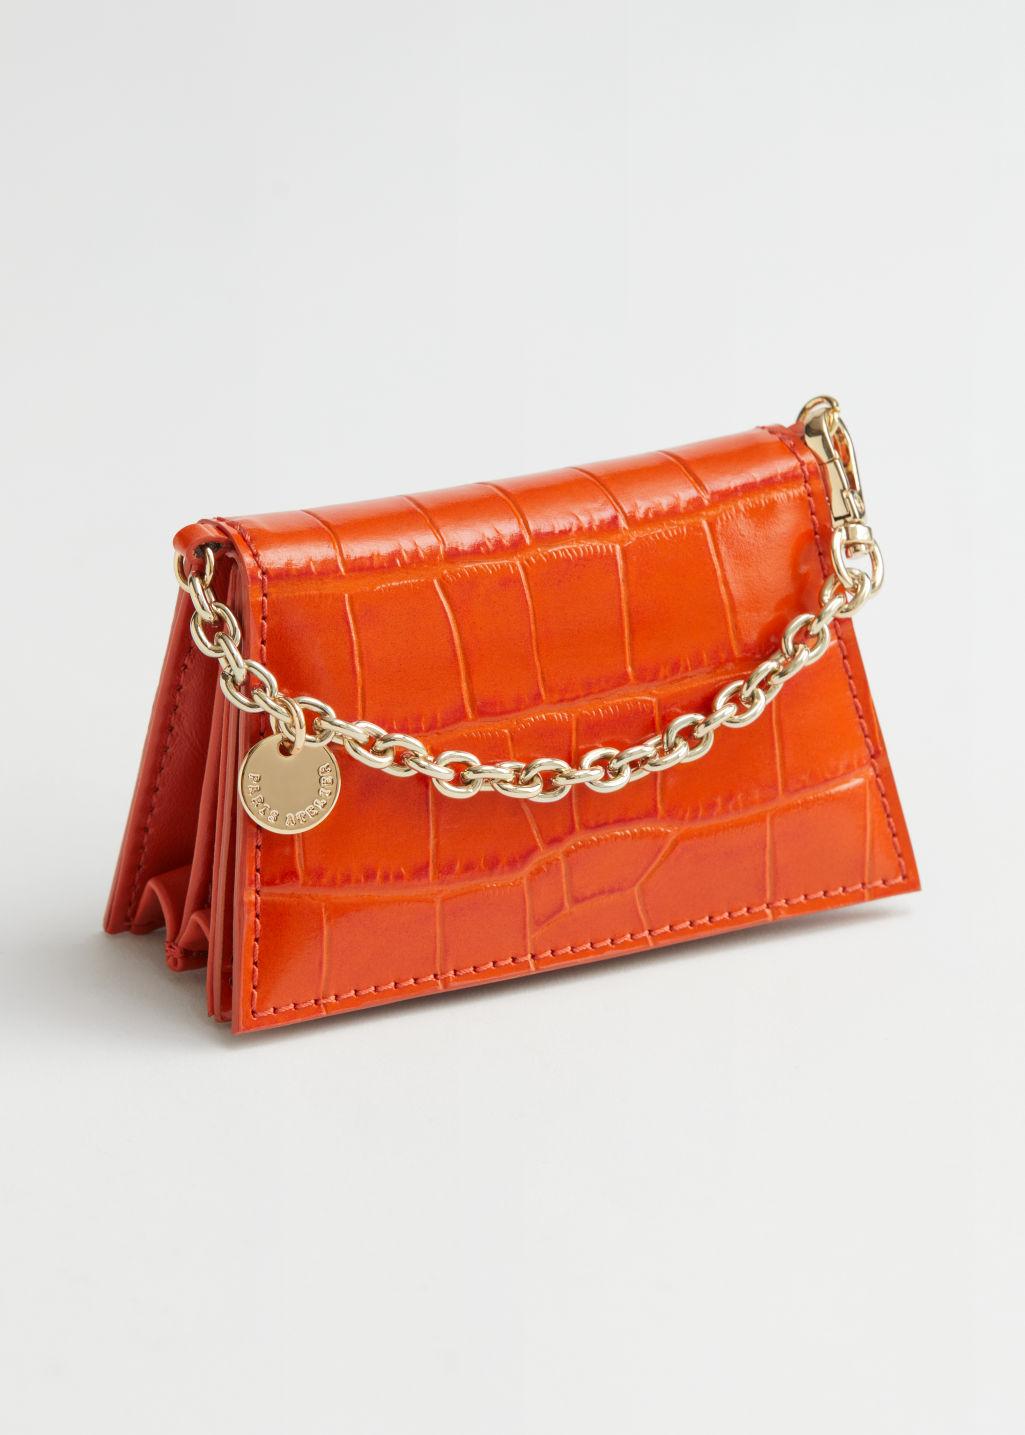 & Other Stories Croc Embossed Leather Chain Wallet in Orange | Lyst